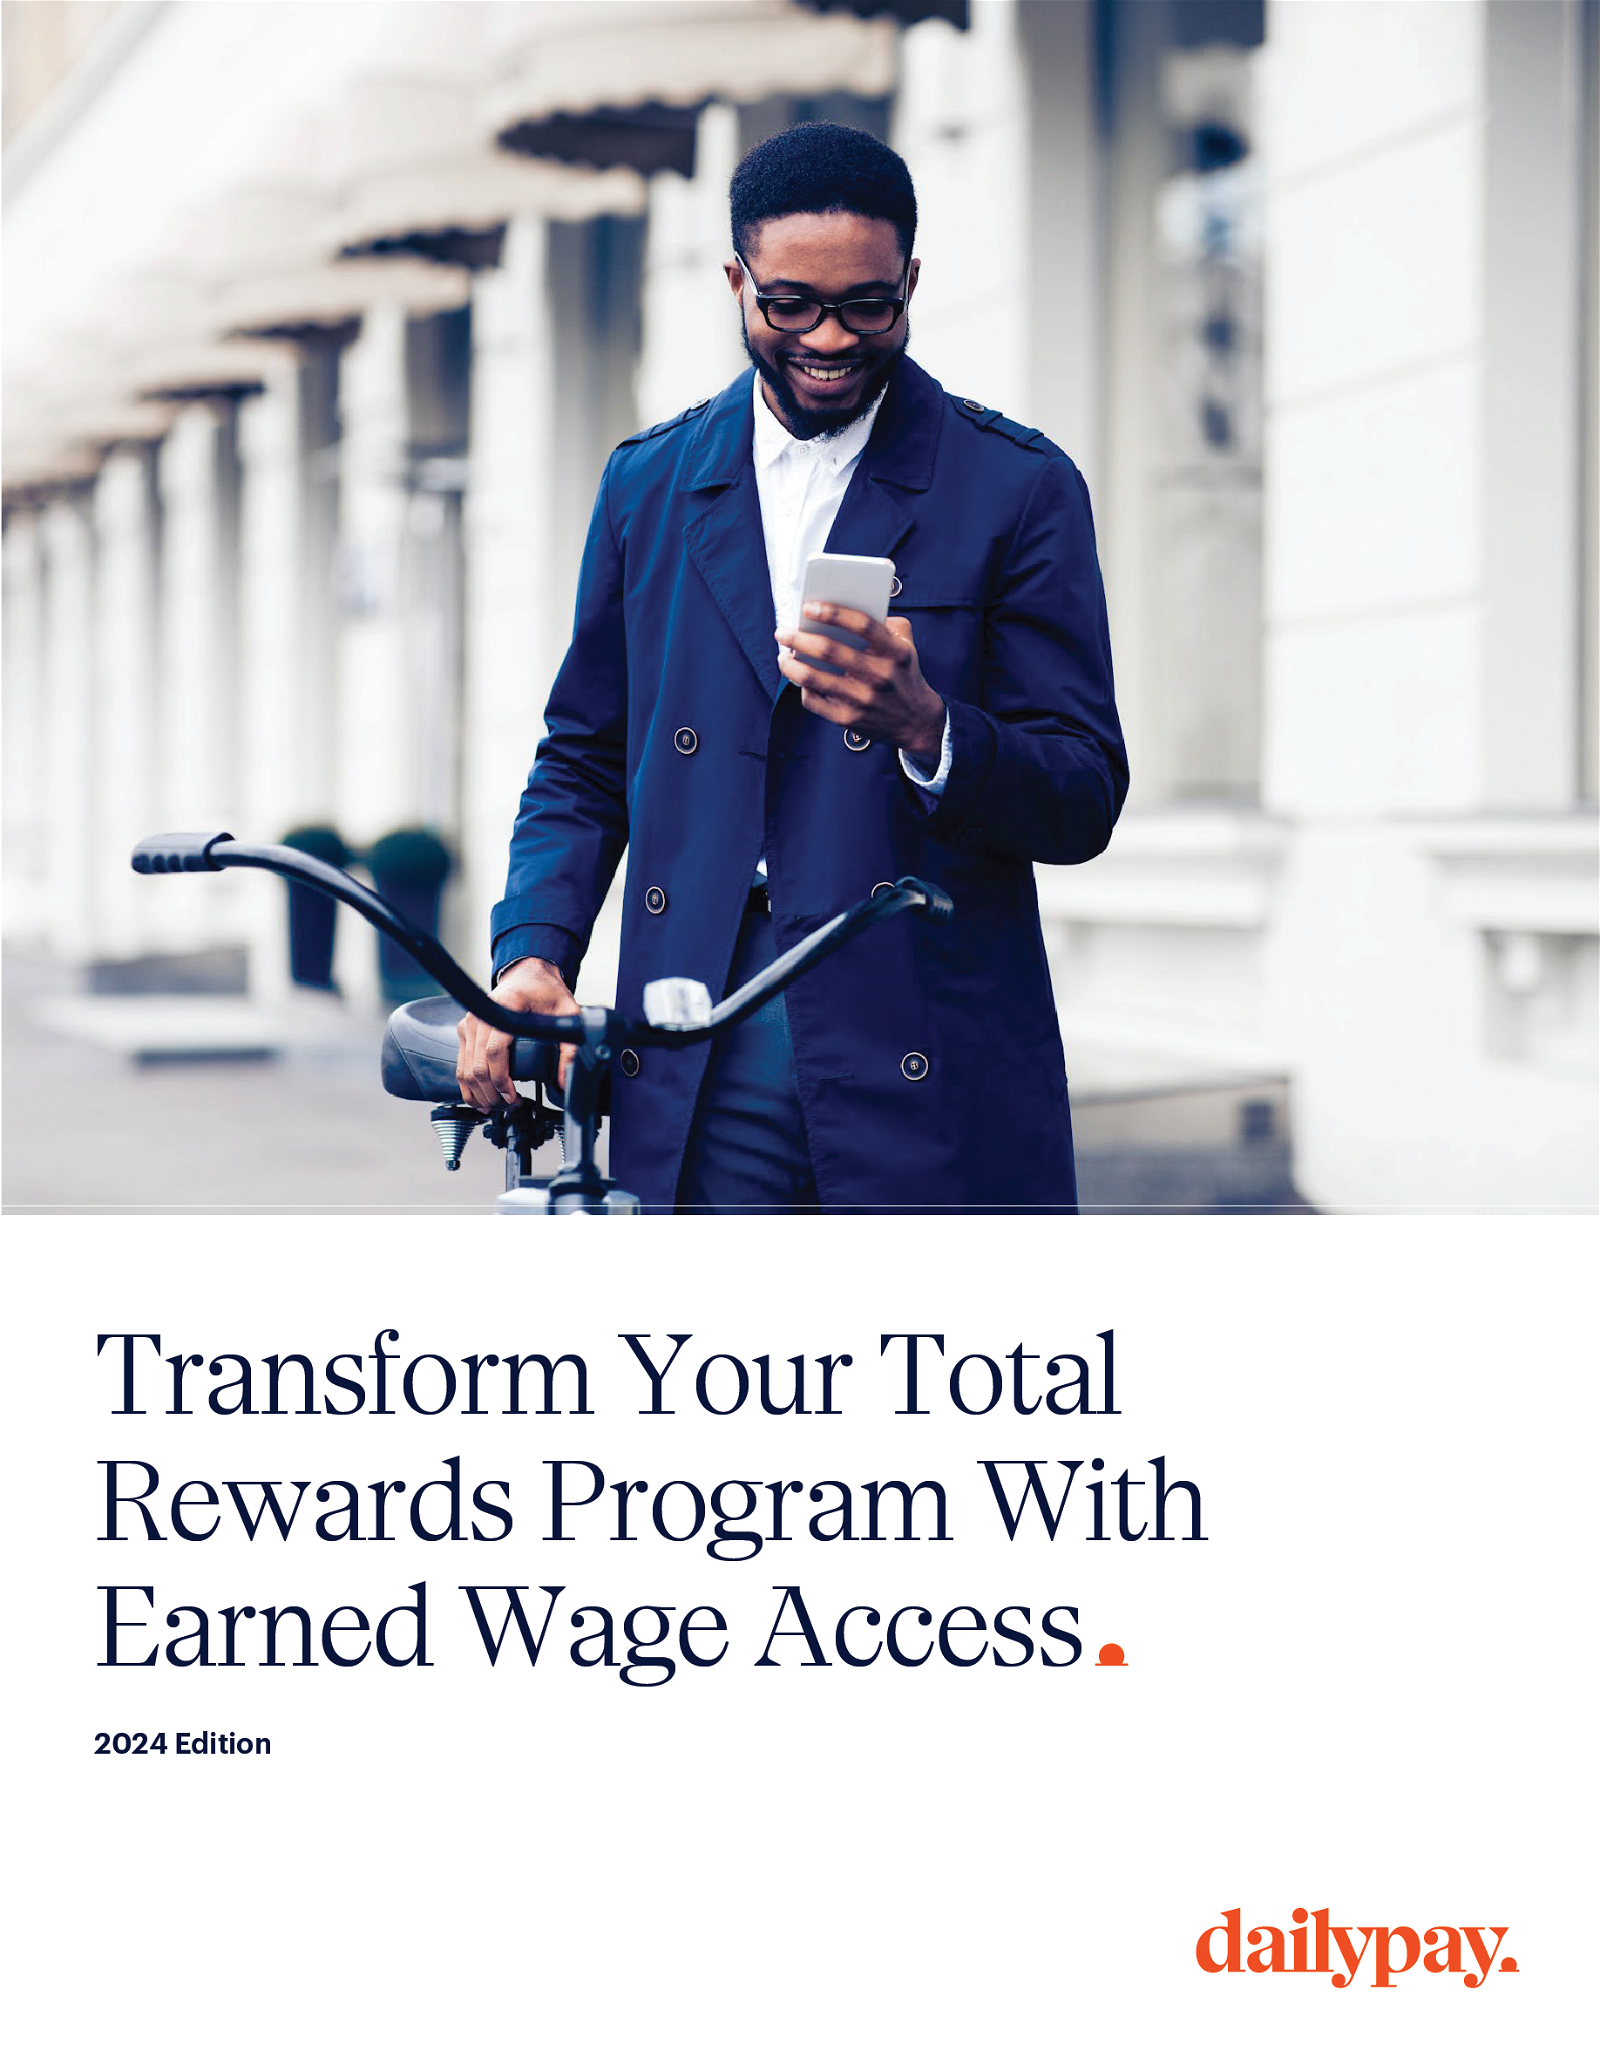 A person smiles while looking at their phone, standing beside a bicycle. The text reads, "Transform Your Total Rewards Program With Earned Wage Access. 2024 Edition. dailypay.